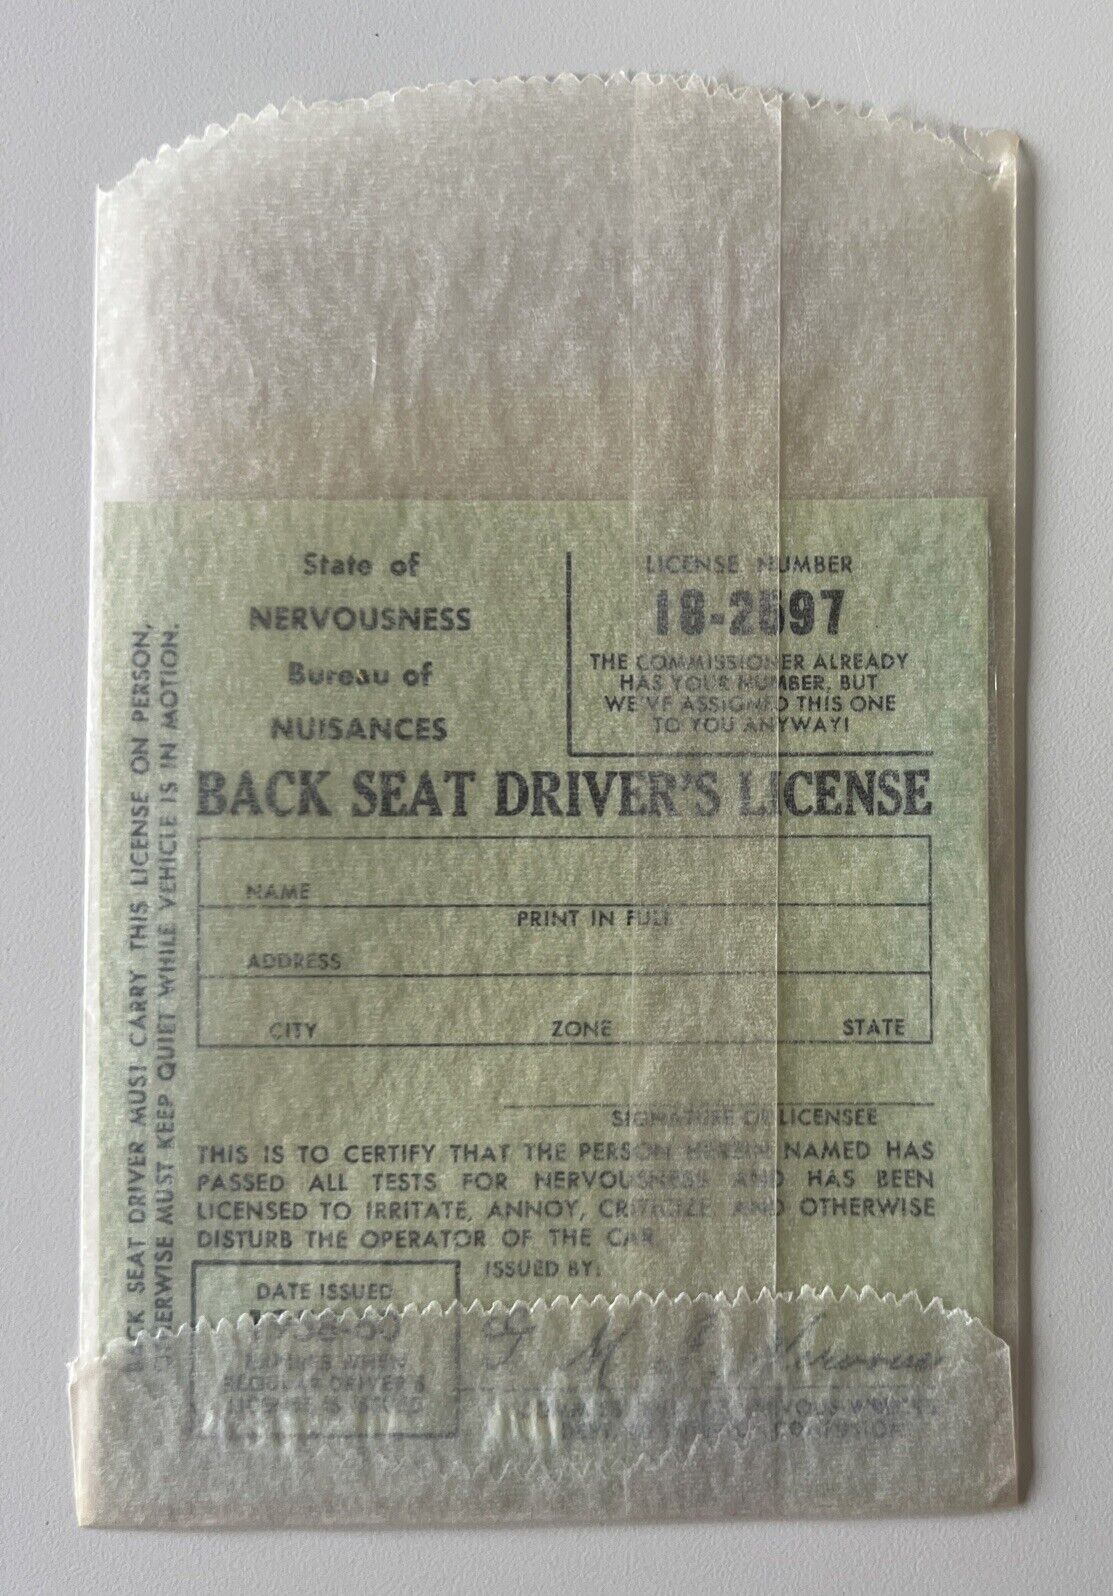 Vintage 1958-60 Back Seat Driver’s License Hilarious Funny Gag Gift - Brand New